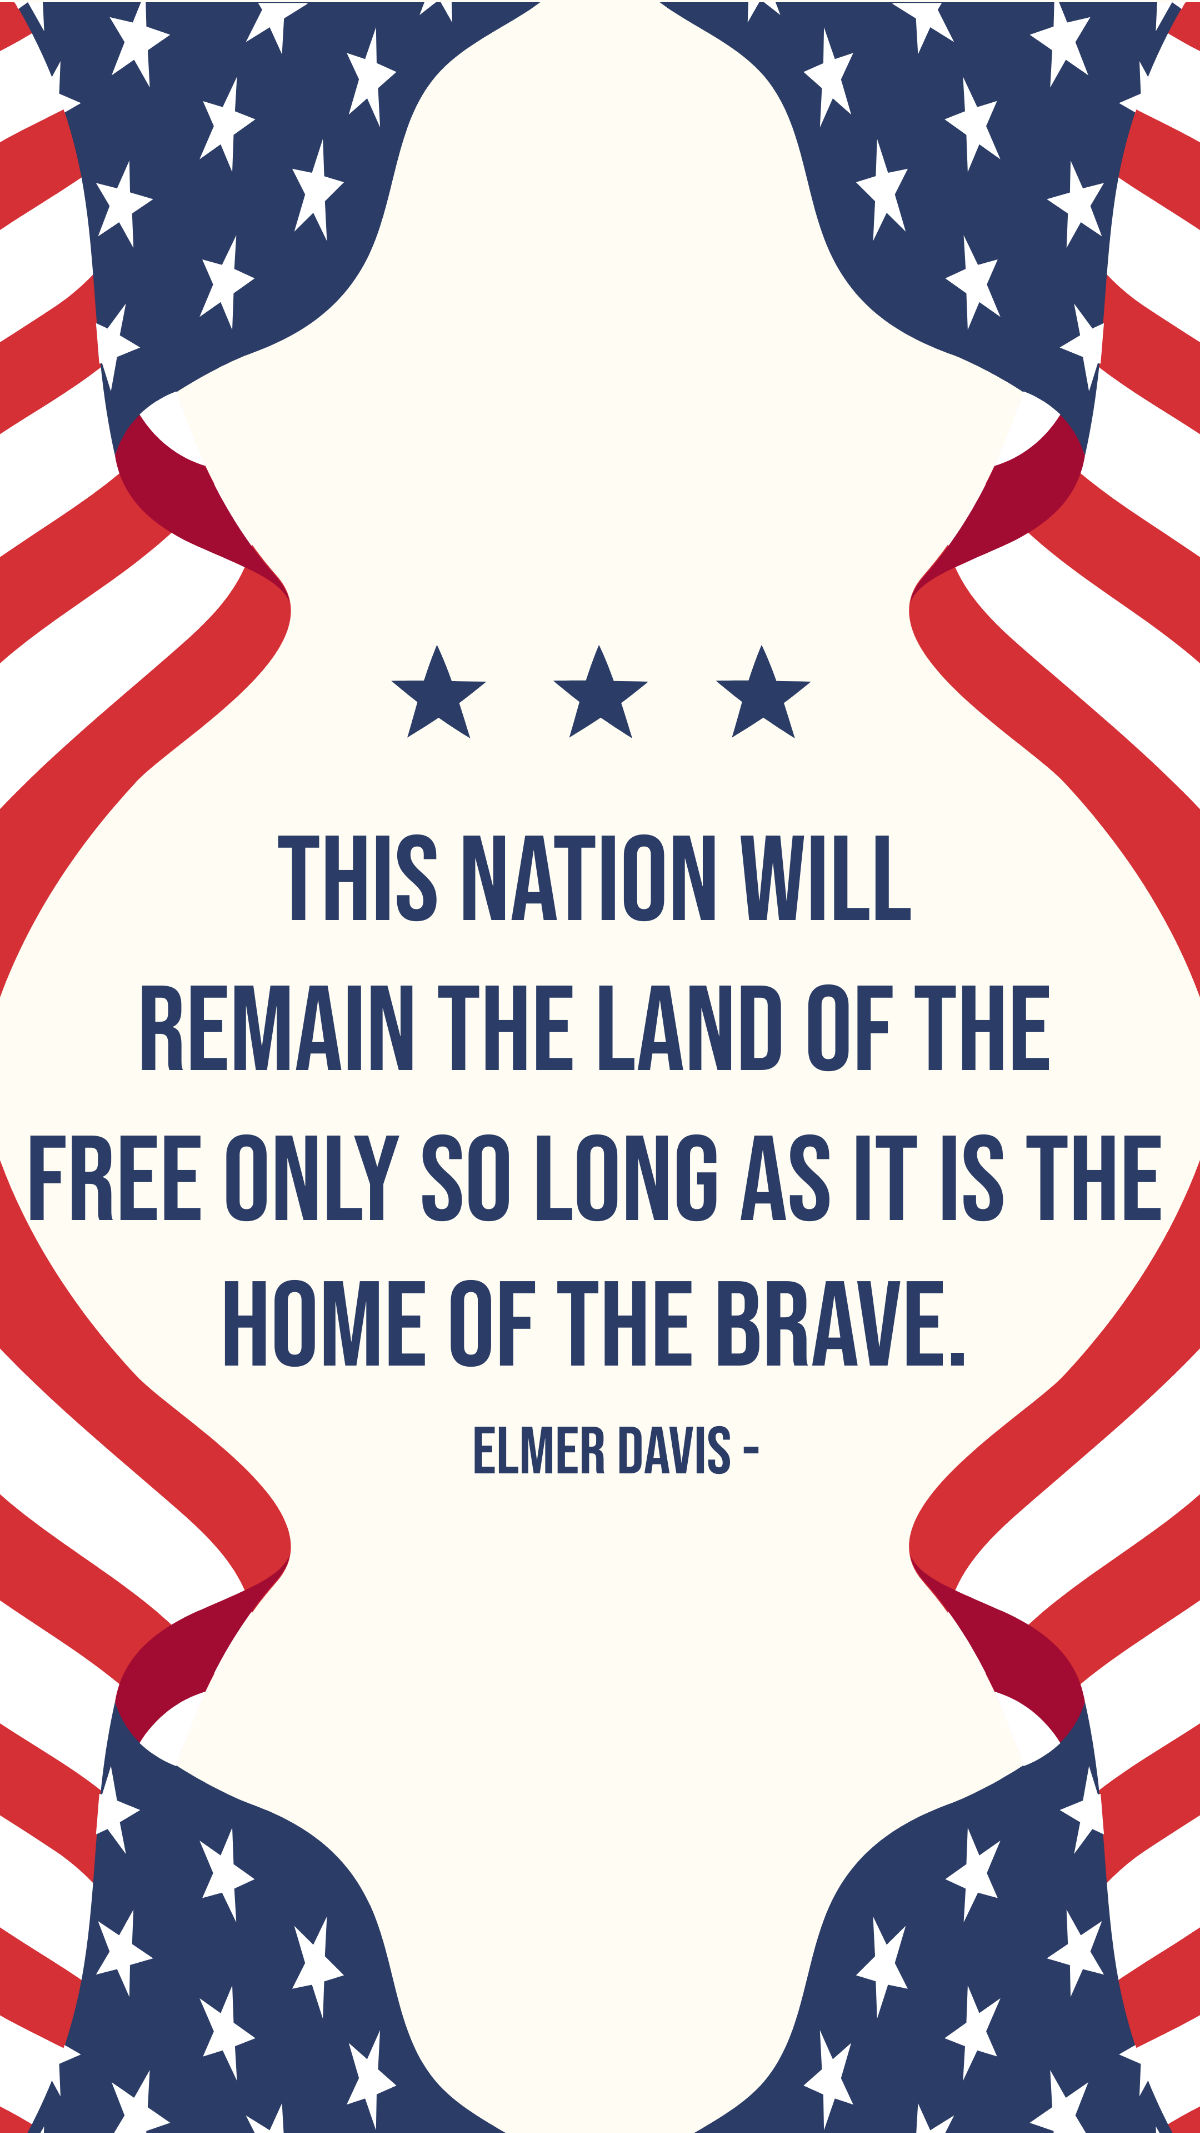 Elmer Davis - This nation will remain the land of the free only so long as it is the home of the brave. Template